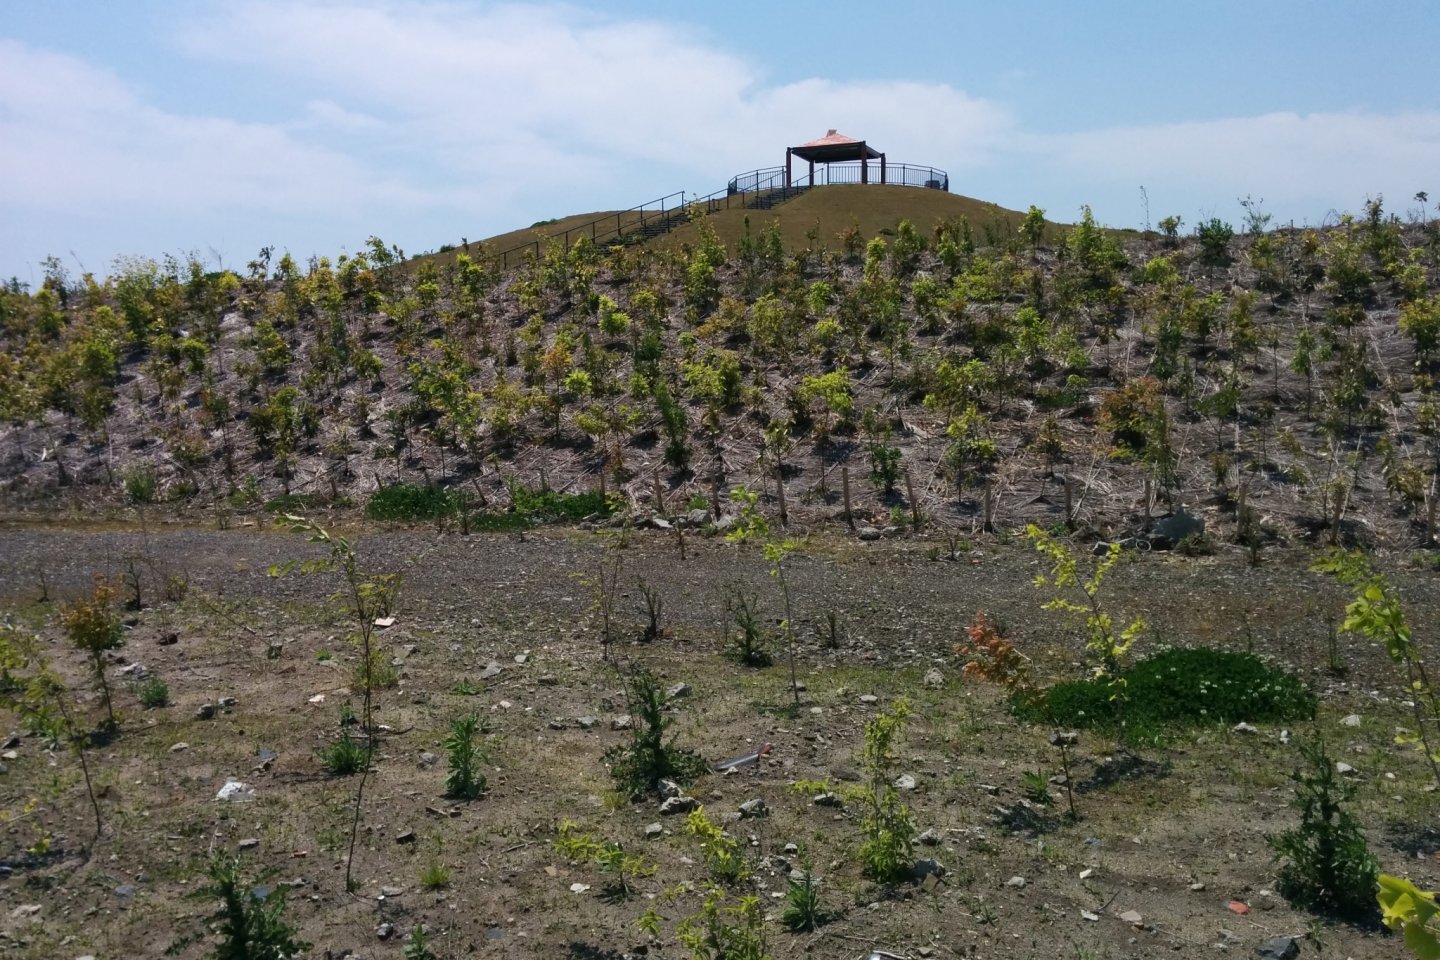 One of the manmade hills of the park used to break up the energy of a tsunami and as an evacuation point